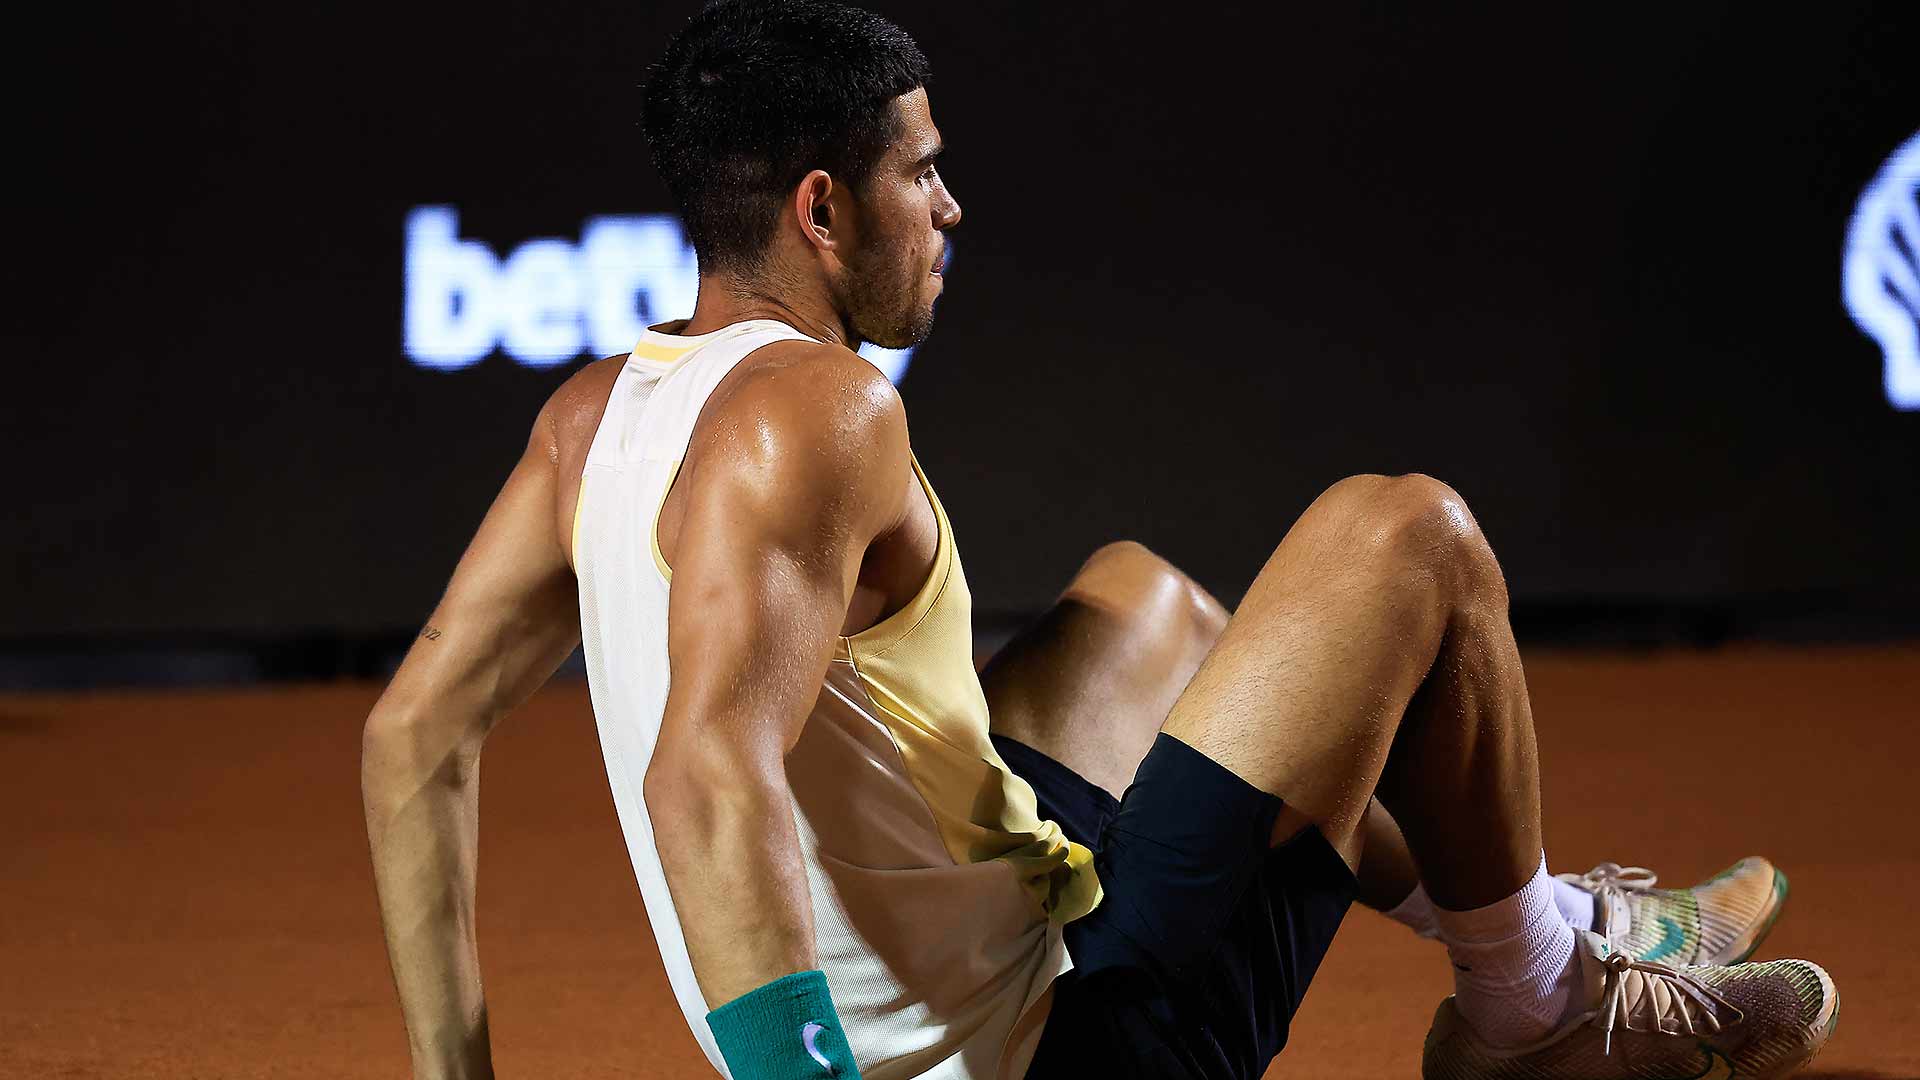 Carlos Alcaraz retired from his first-round match in Rio after two games on Tuesday.